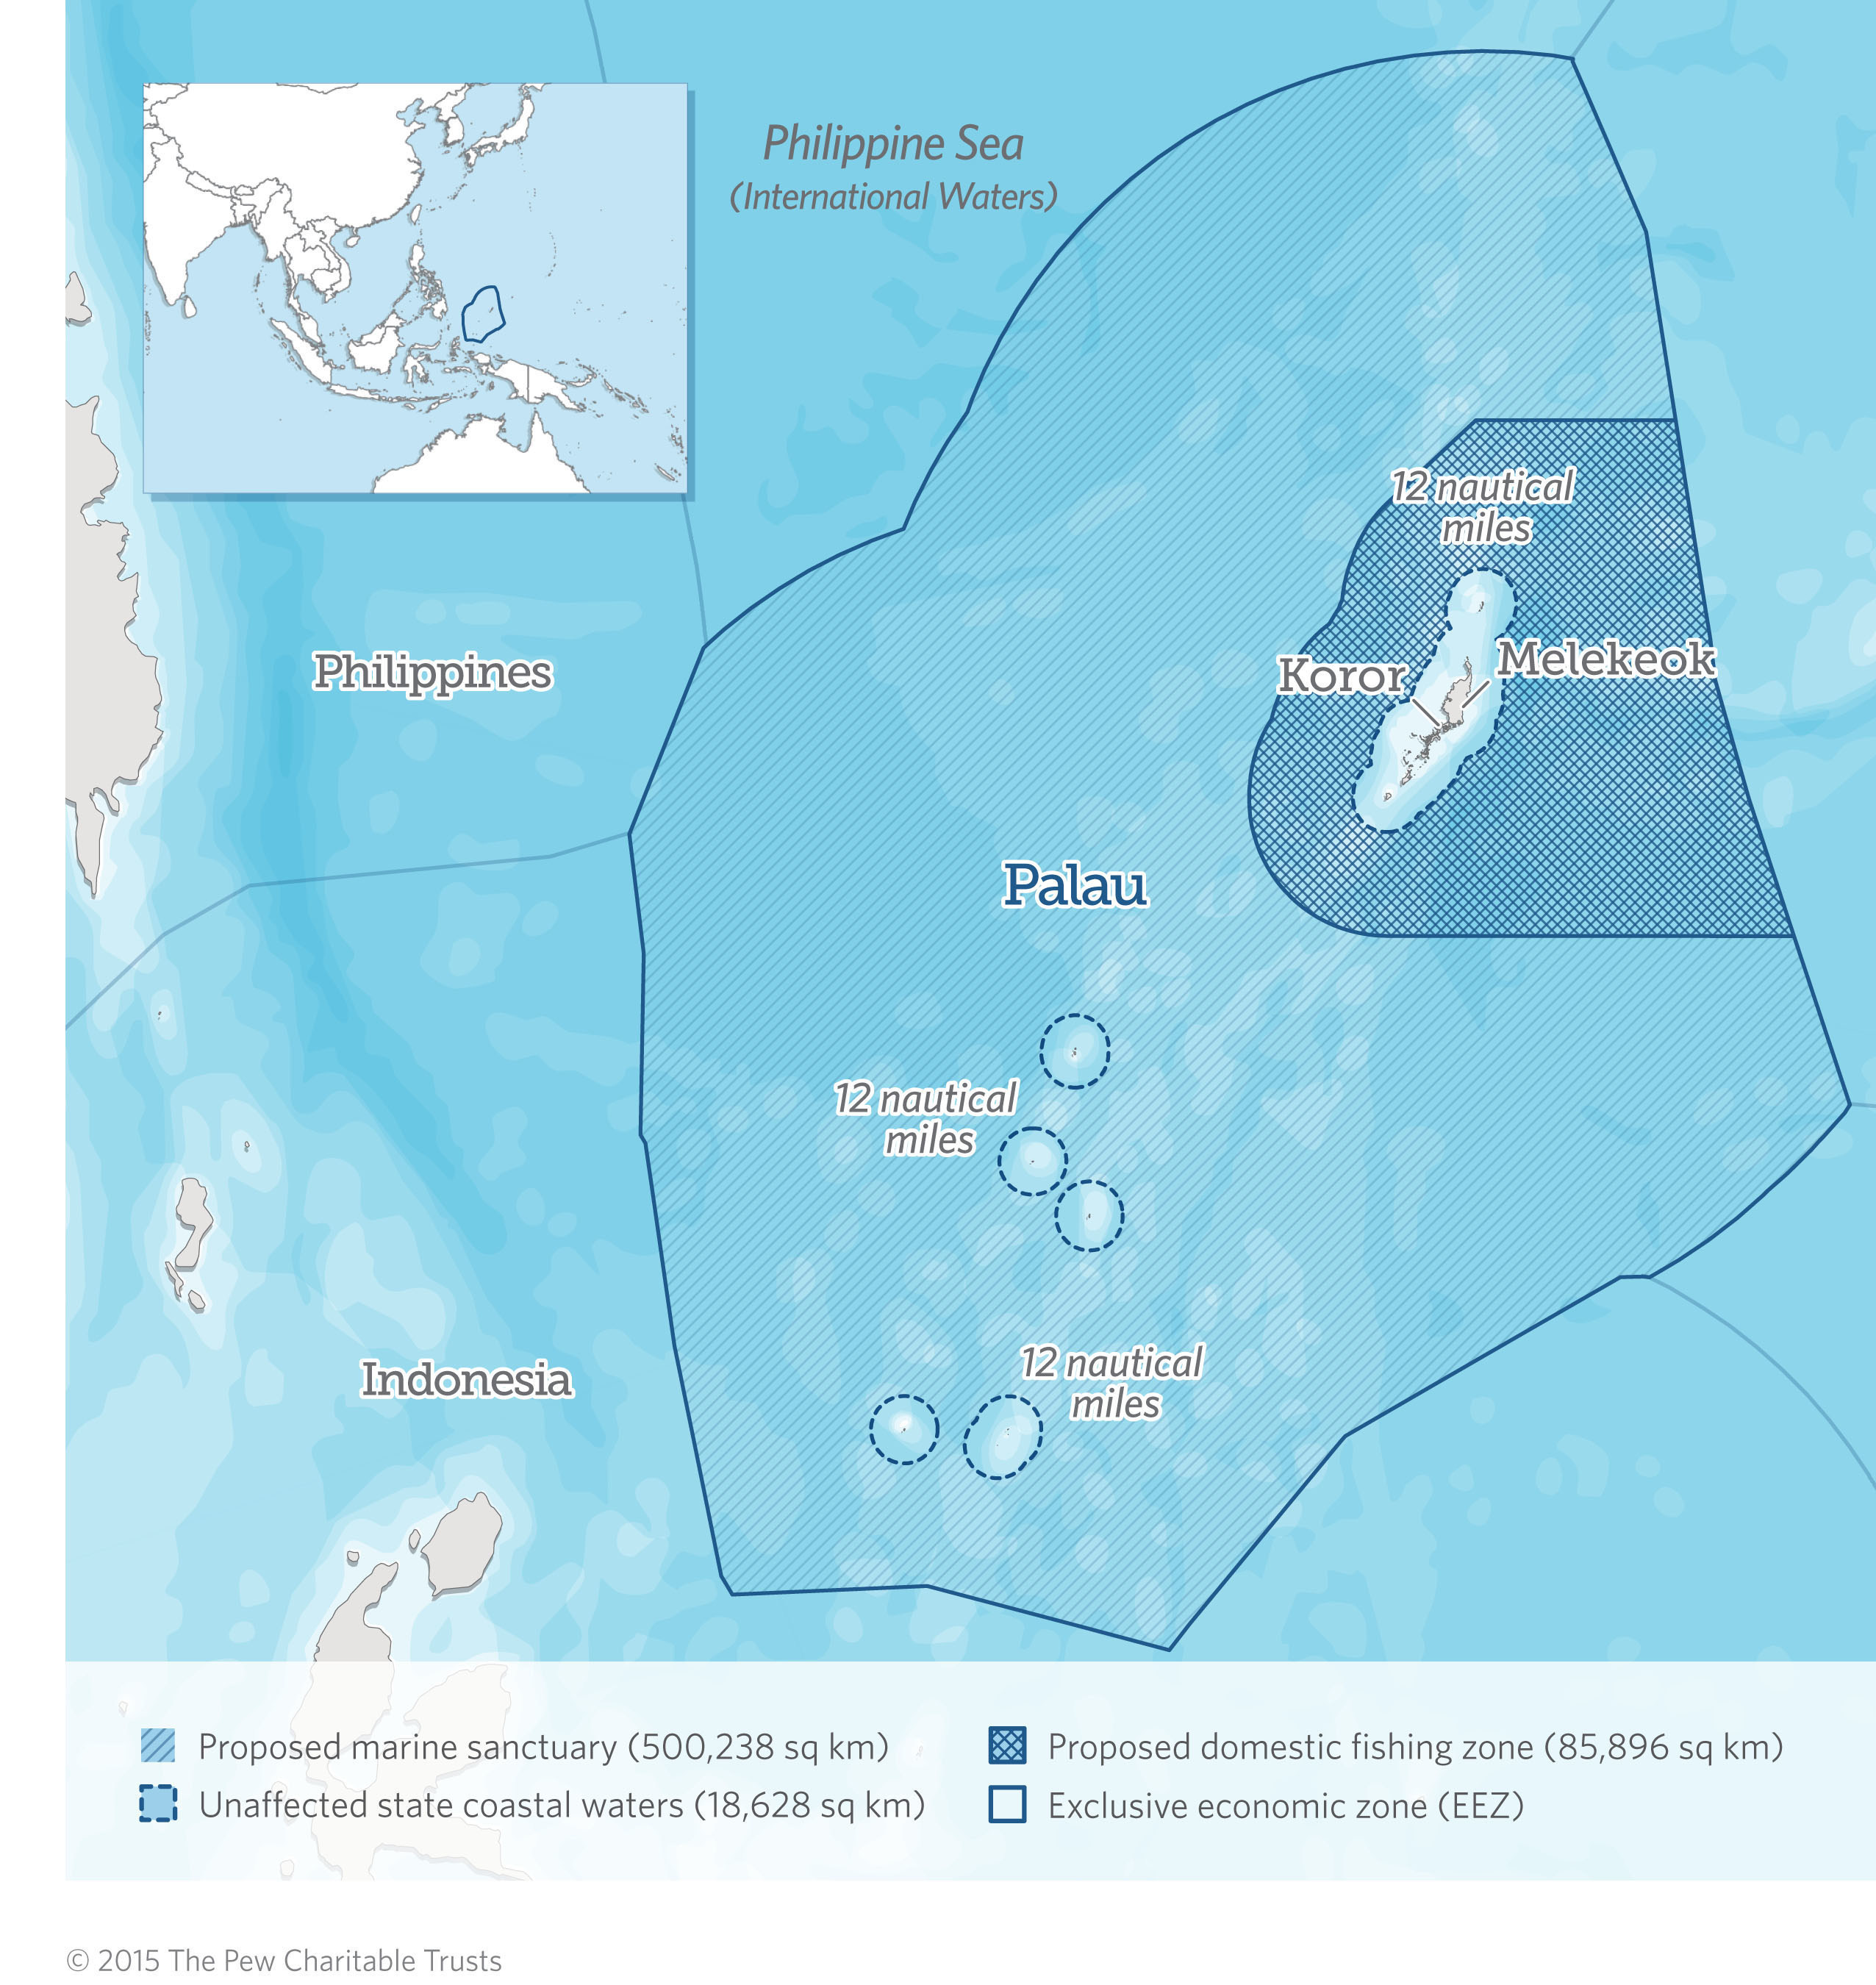 The creation of the national marine sanctuary makes Palau the first country to declare the waters of its entire exclusive economic zone (EEZ) a marine protected area, with an integral part of the sanctuary a fully protected "no take" zone of 500,000 square kilometers (193,000 square miles).